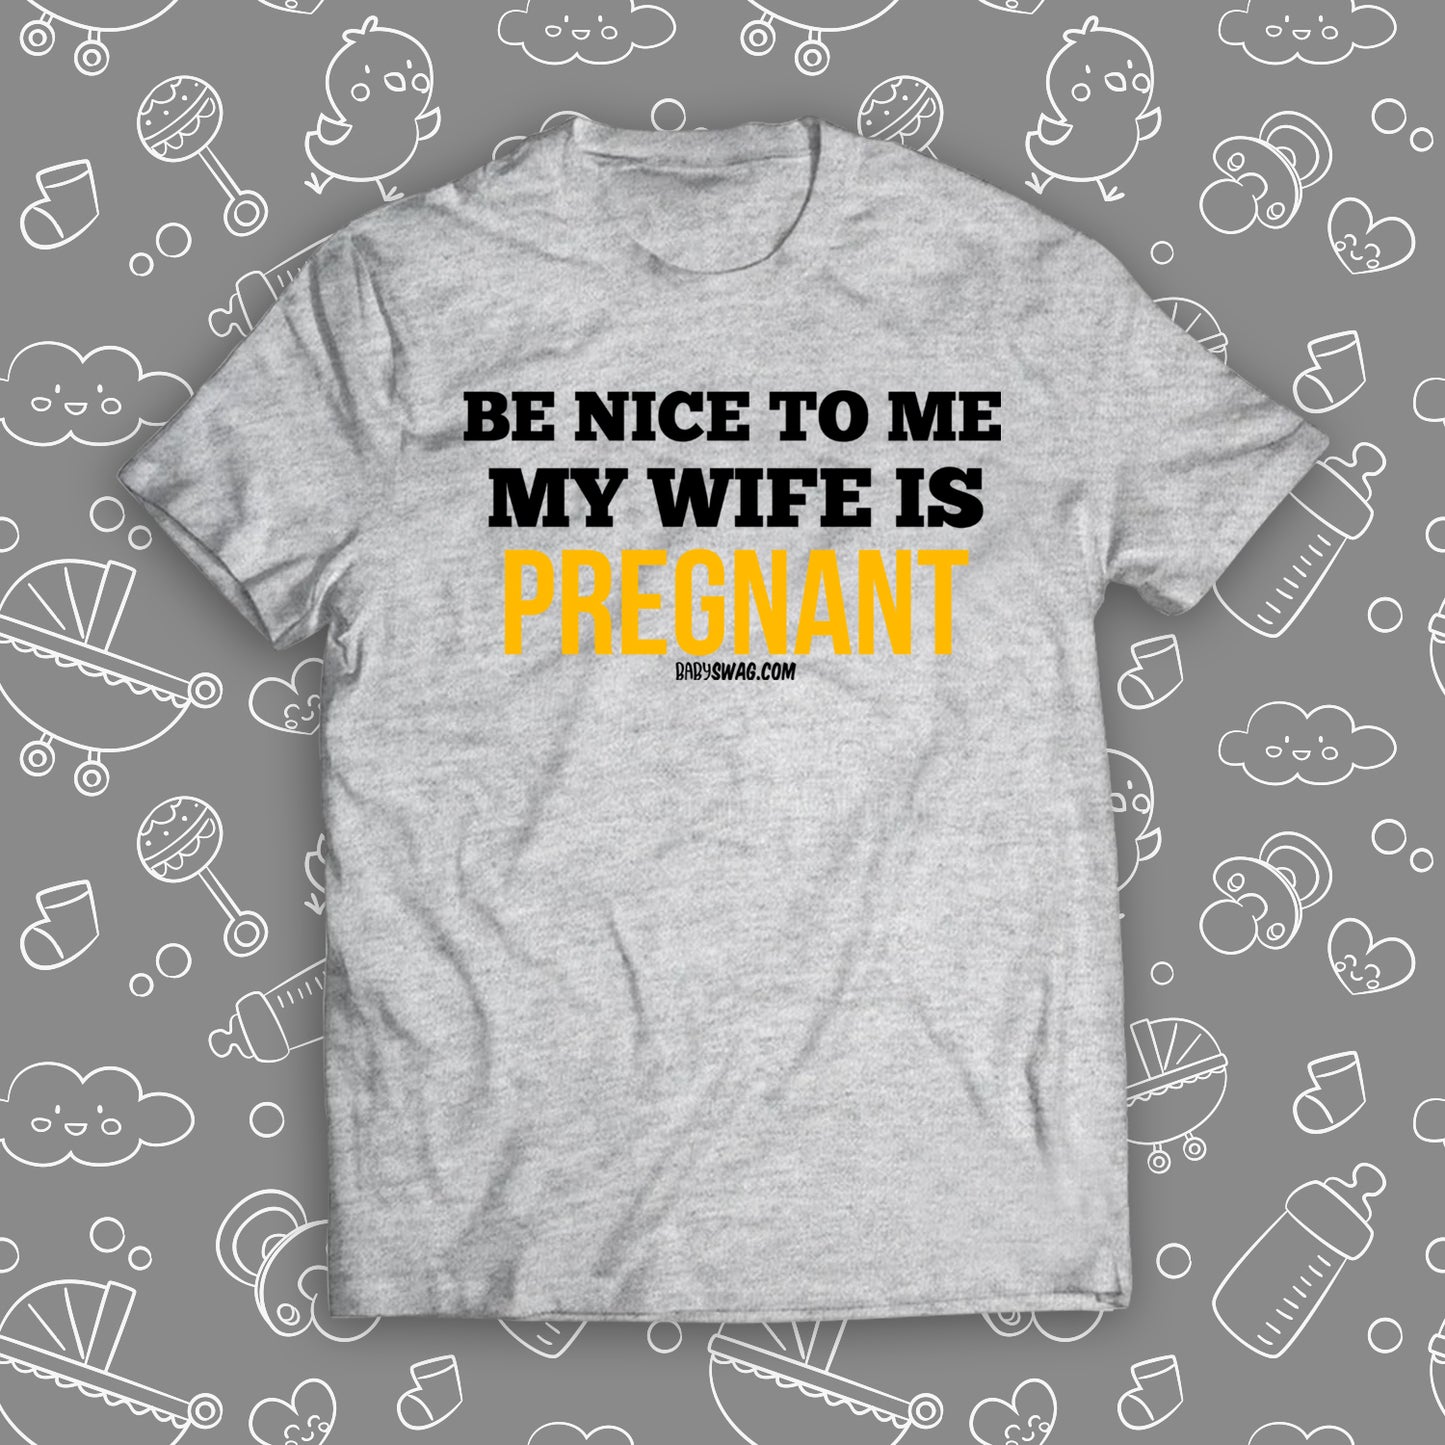 Be Nice To Me, My Wife Is Pregnant